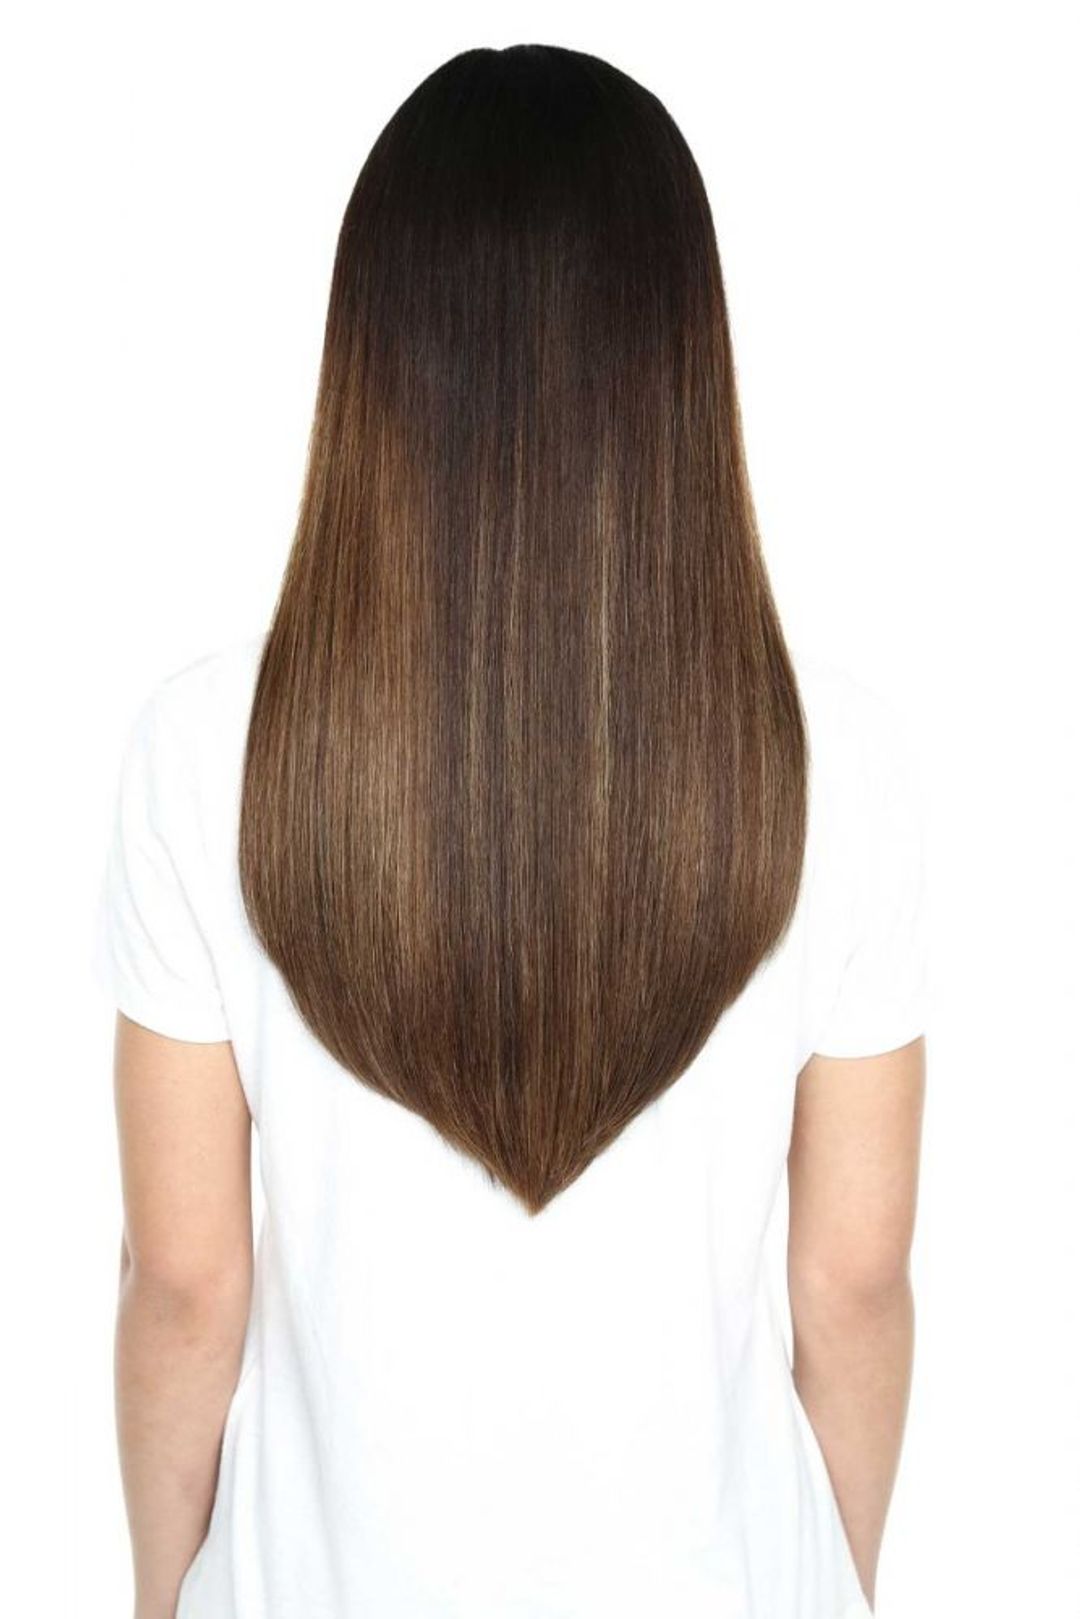 Beauty Works Gold Double Weft Extensions - Silver,18"